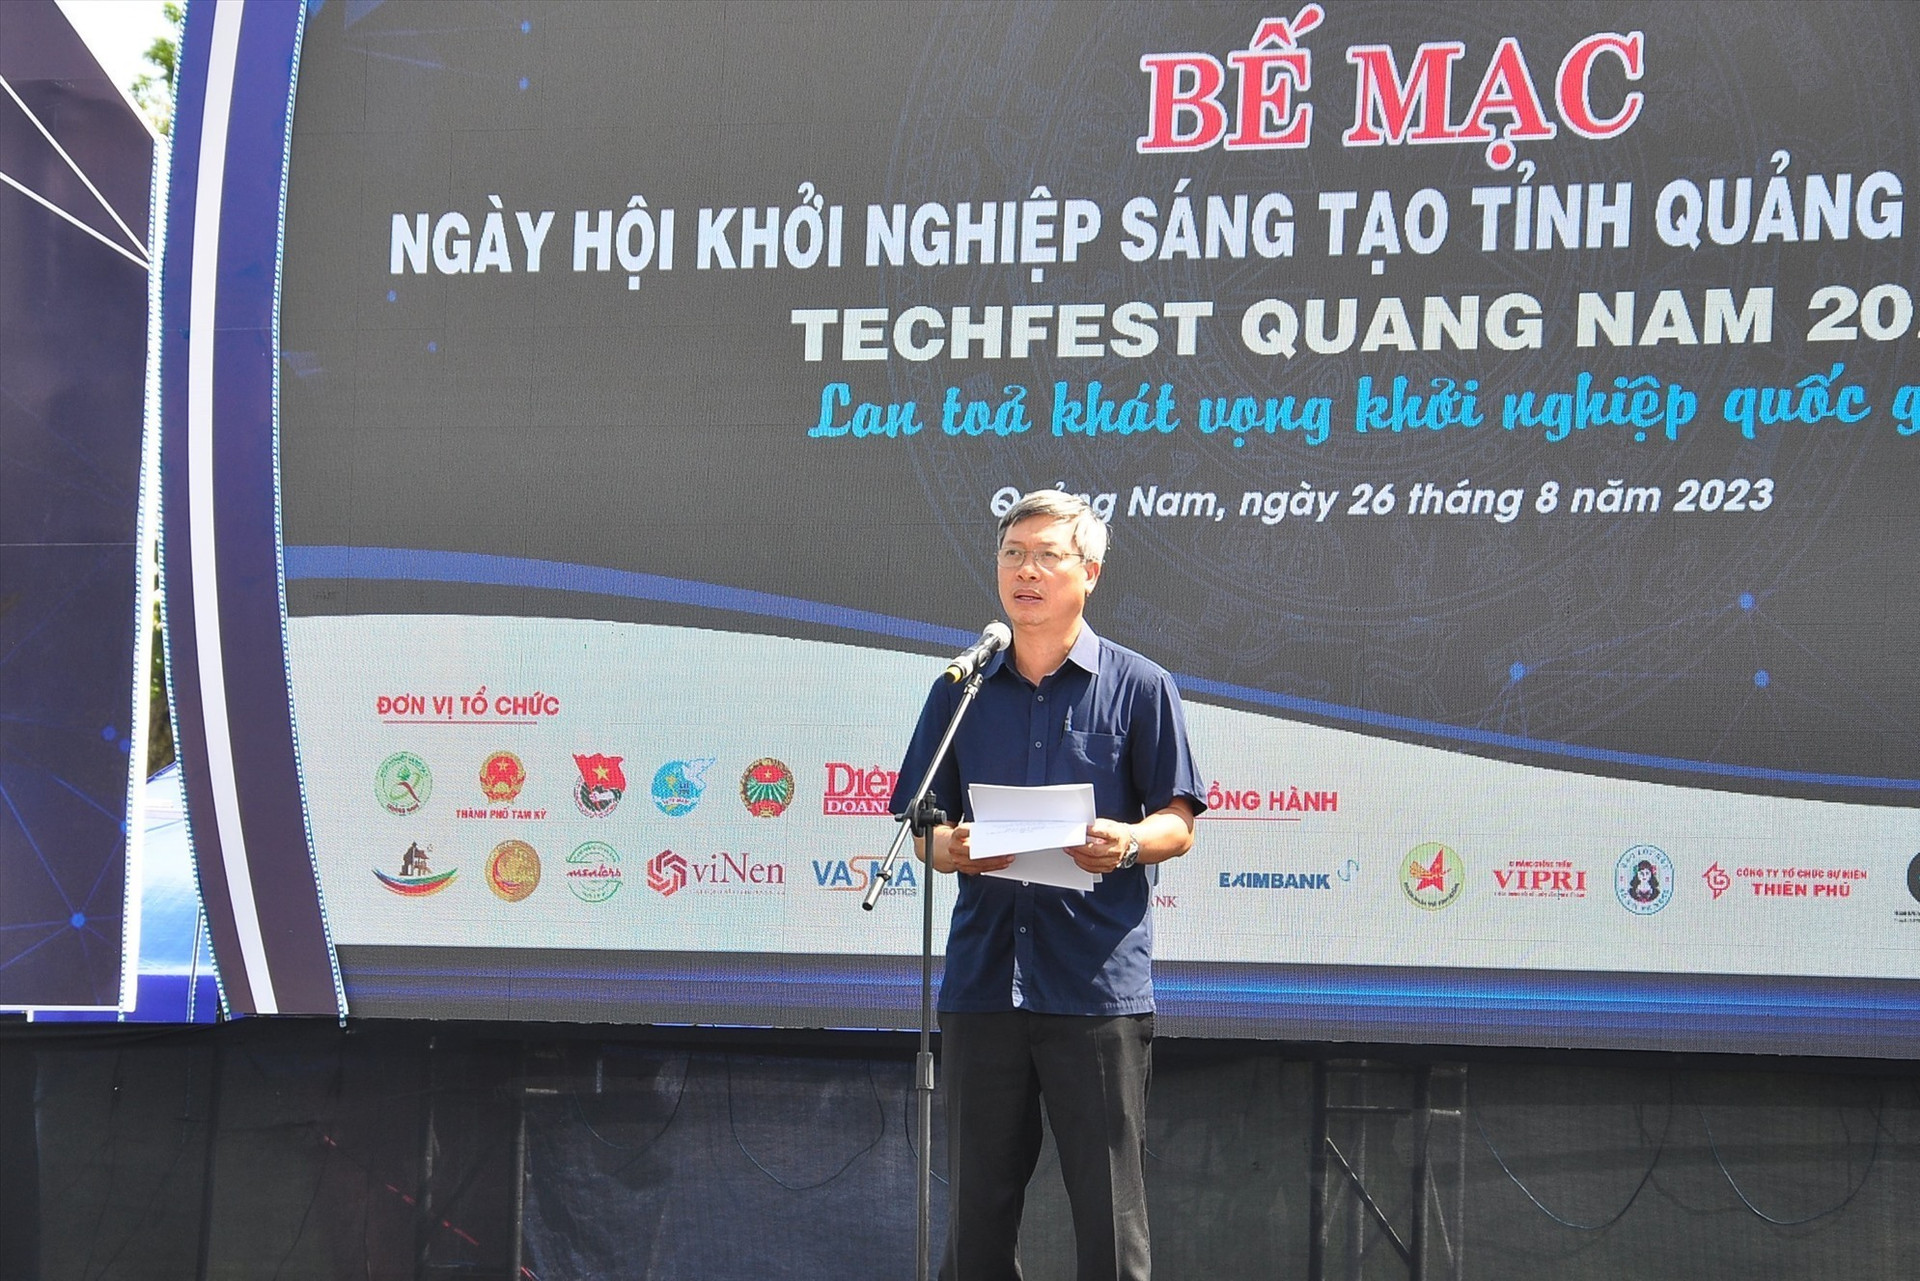 Ho Quang Buu at the TechFest Quang Nam 2023 Closing Ceremony